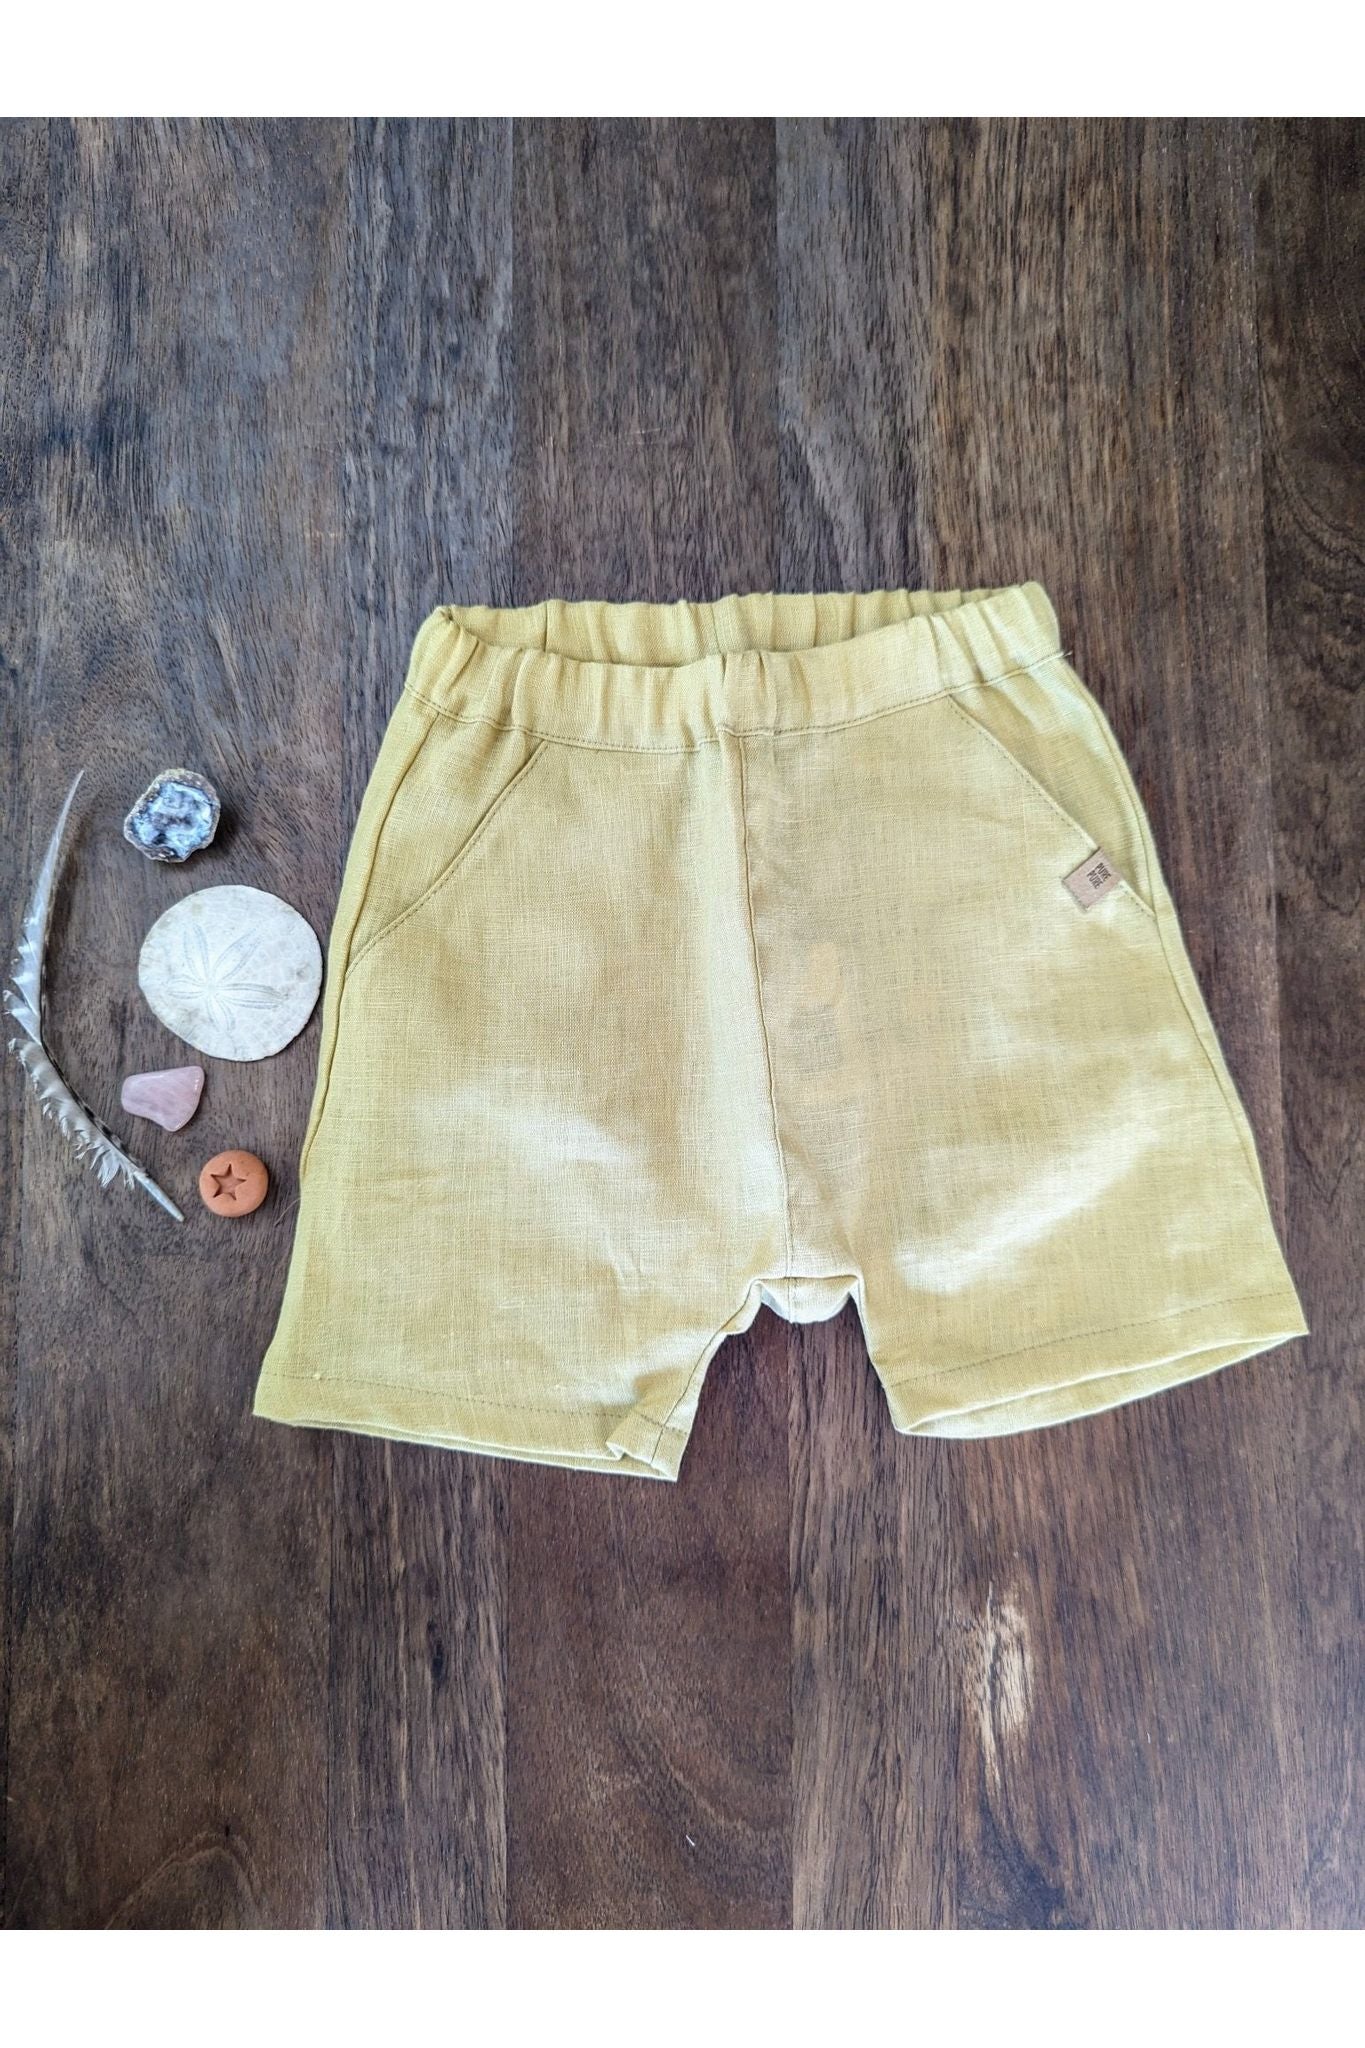 Pure Pure - Linen Shorts - Baby & Kids (3 colors) - Nature's Wild Child